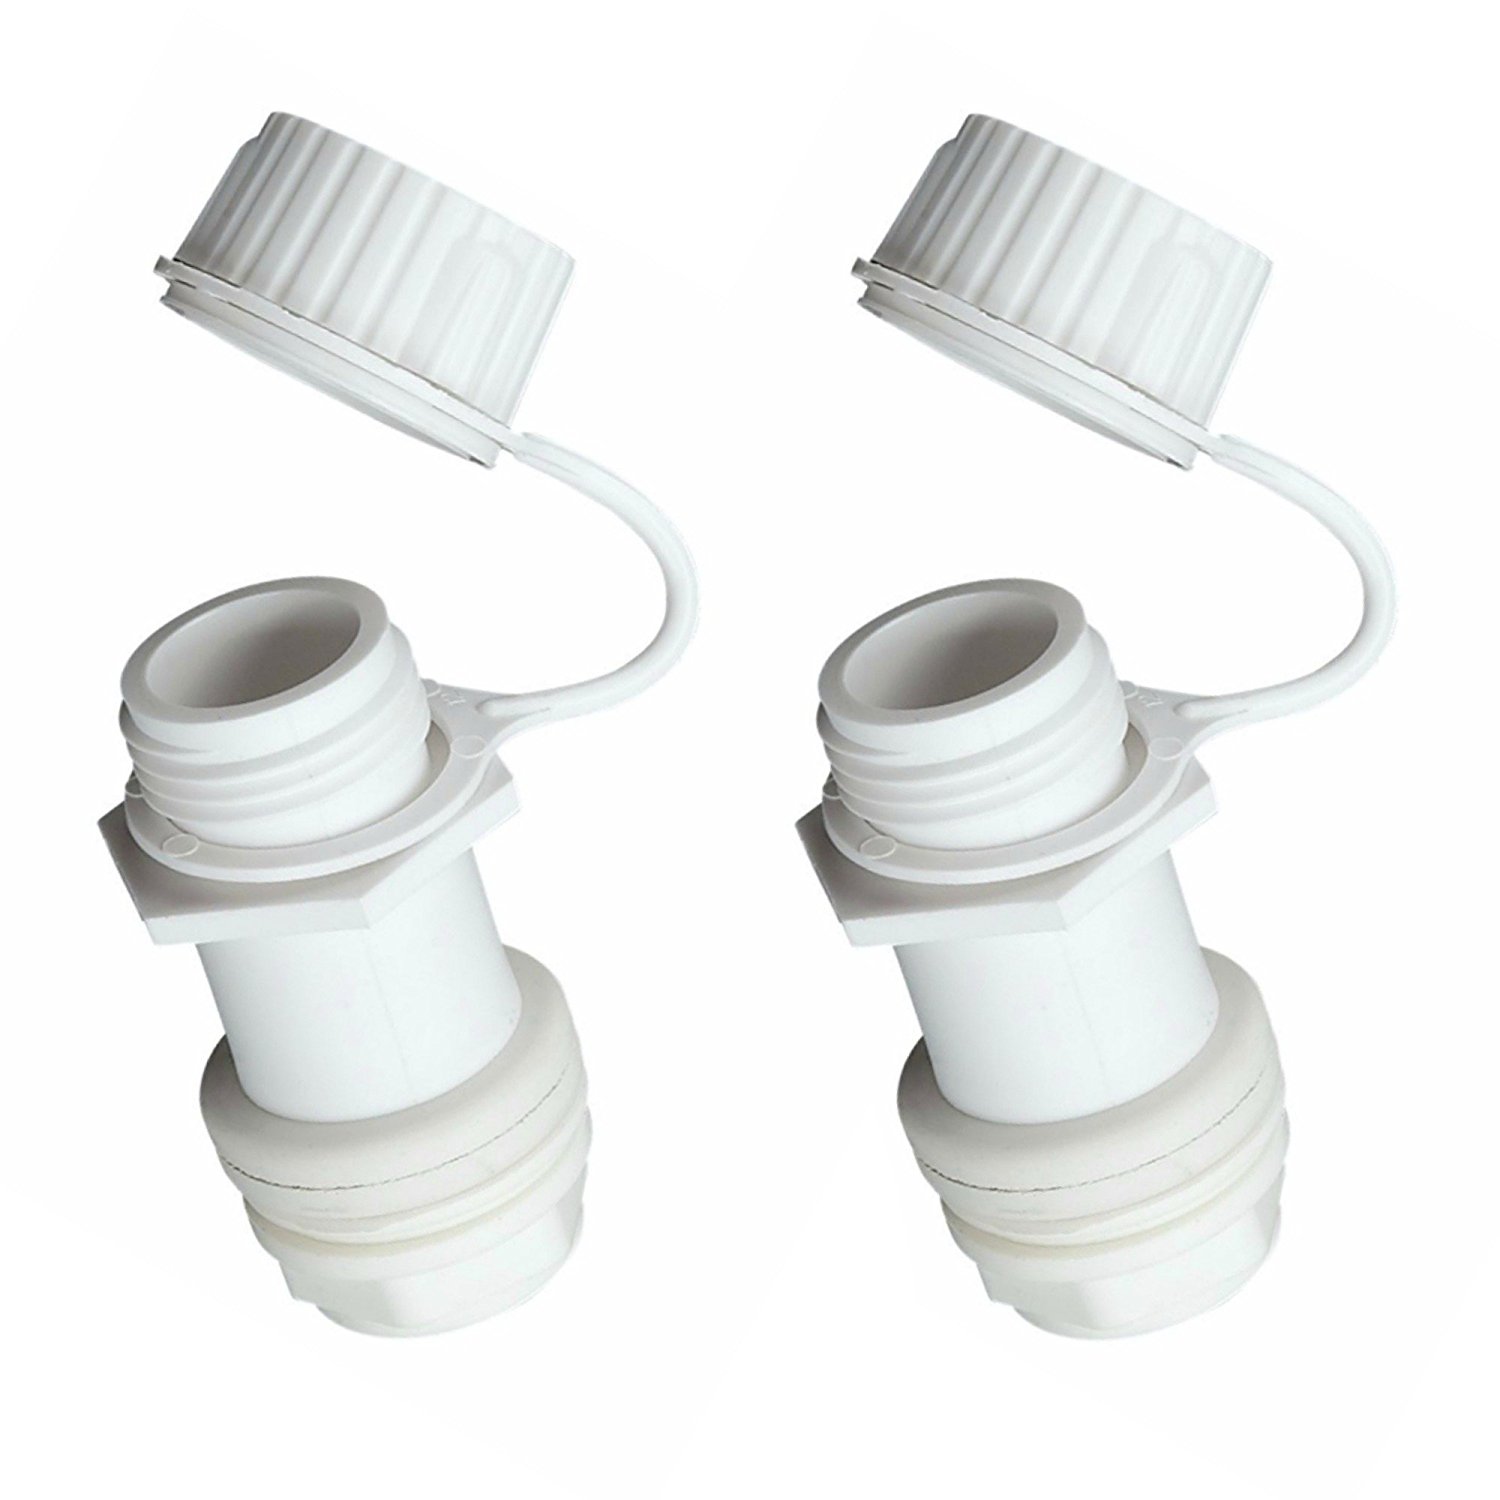 Igloo Threaded Drain Plug, 2PK Cooler Replacement - image 1 of 5